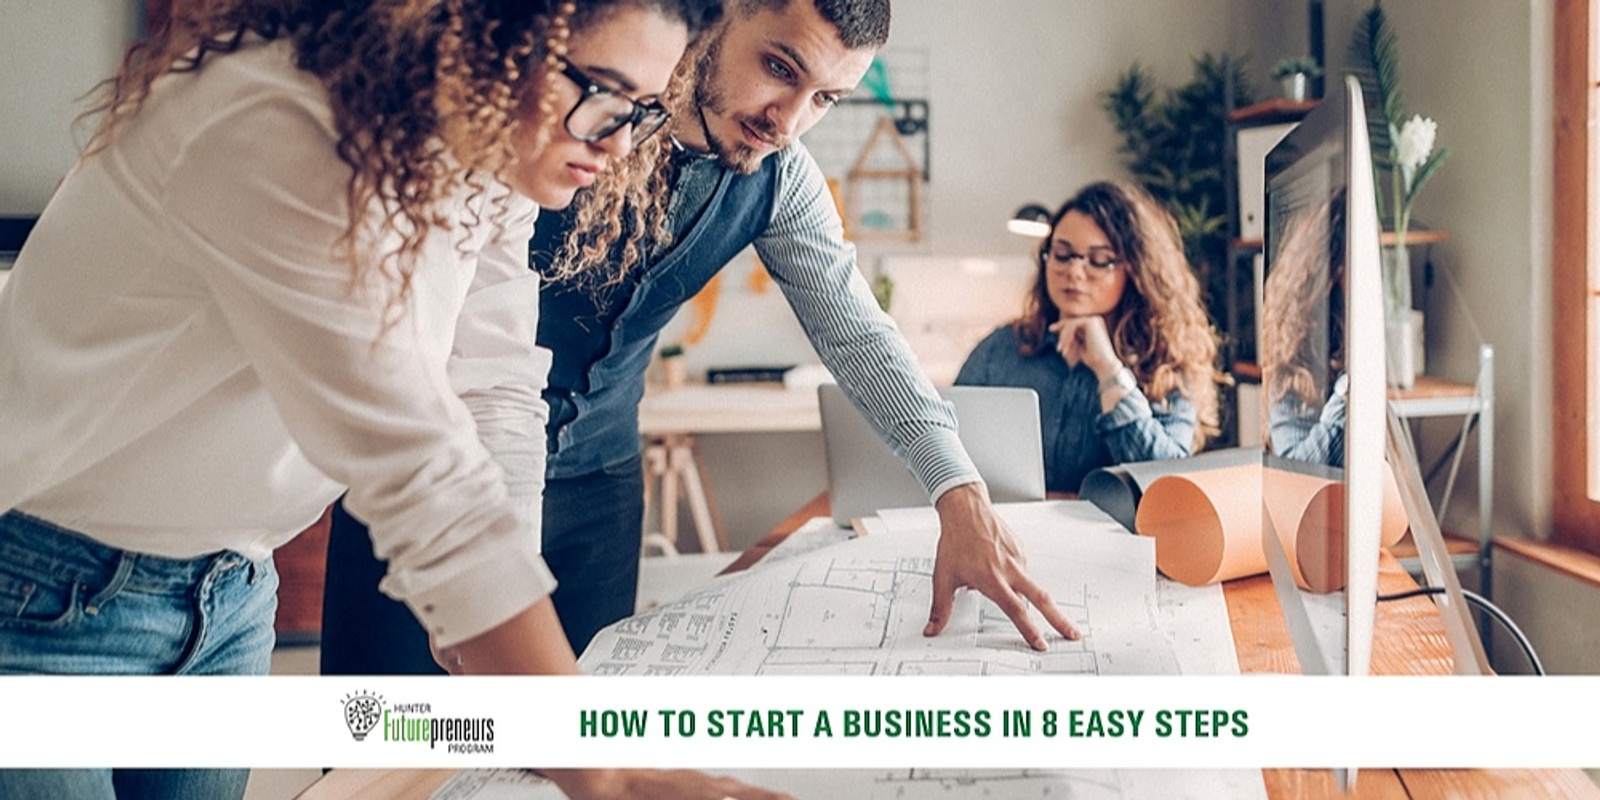 How to Start a Business in 8 Easy Steps